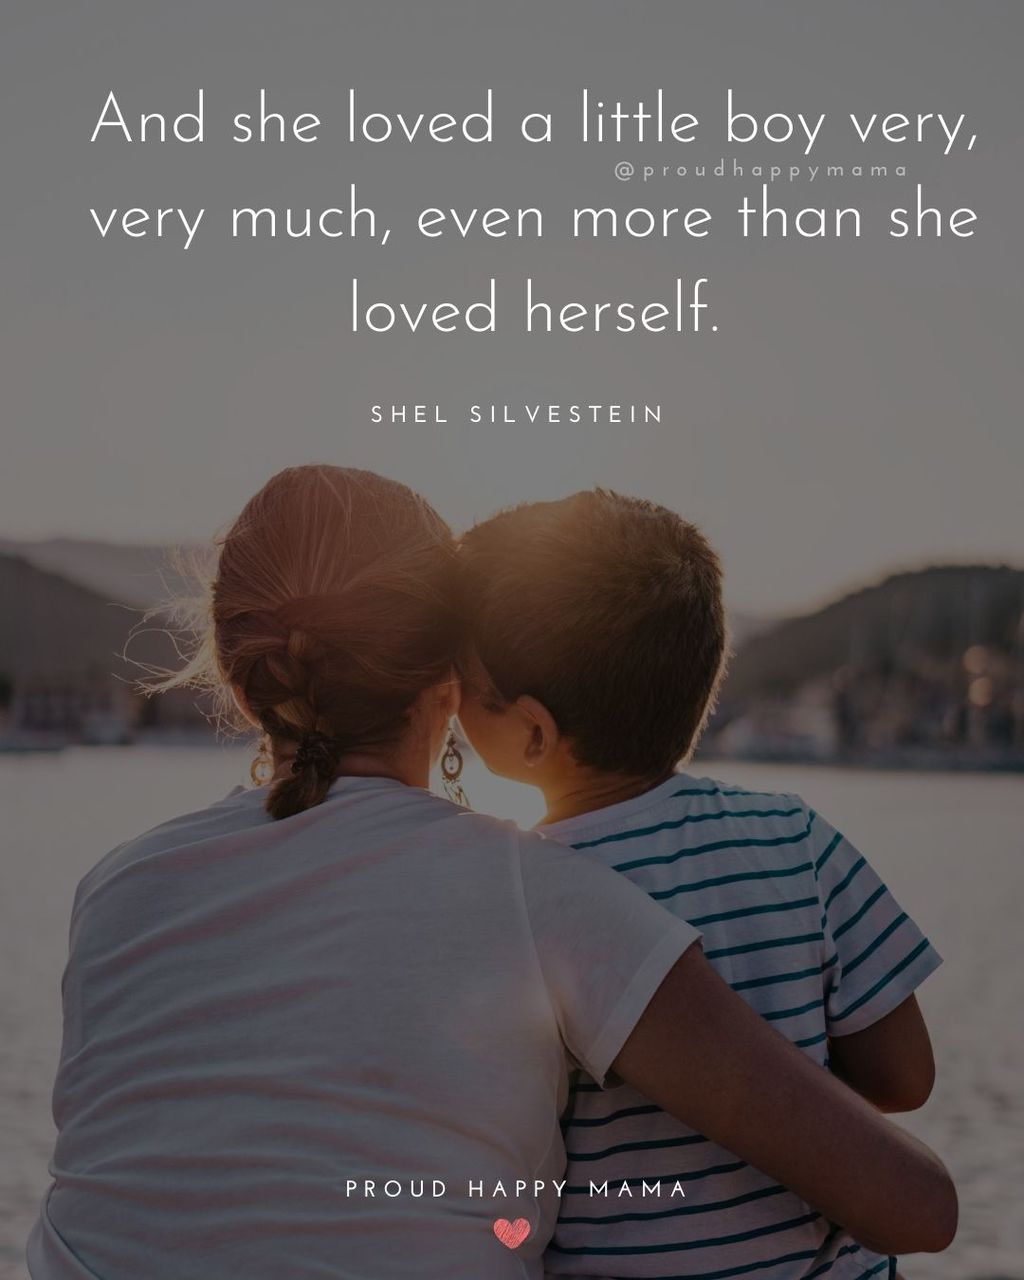 Boy Mom Quotes - And she loved a little boy very much, even more than she loved herself. – Shel Silverstein